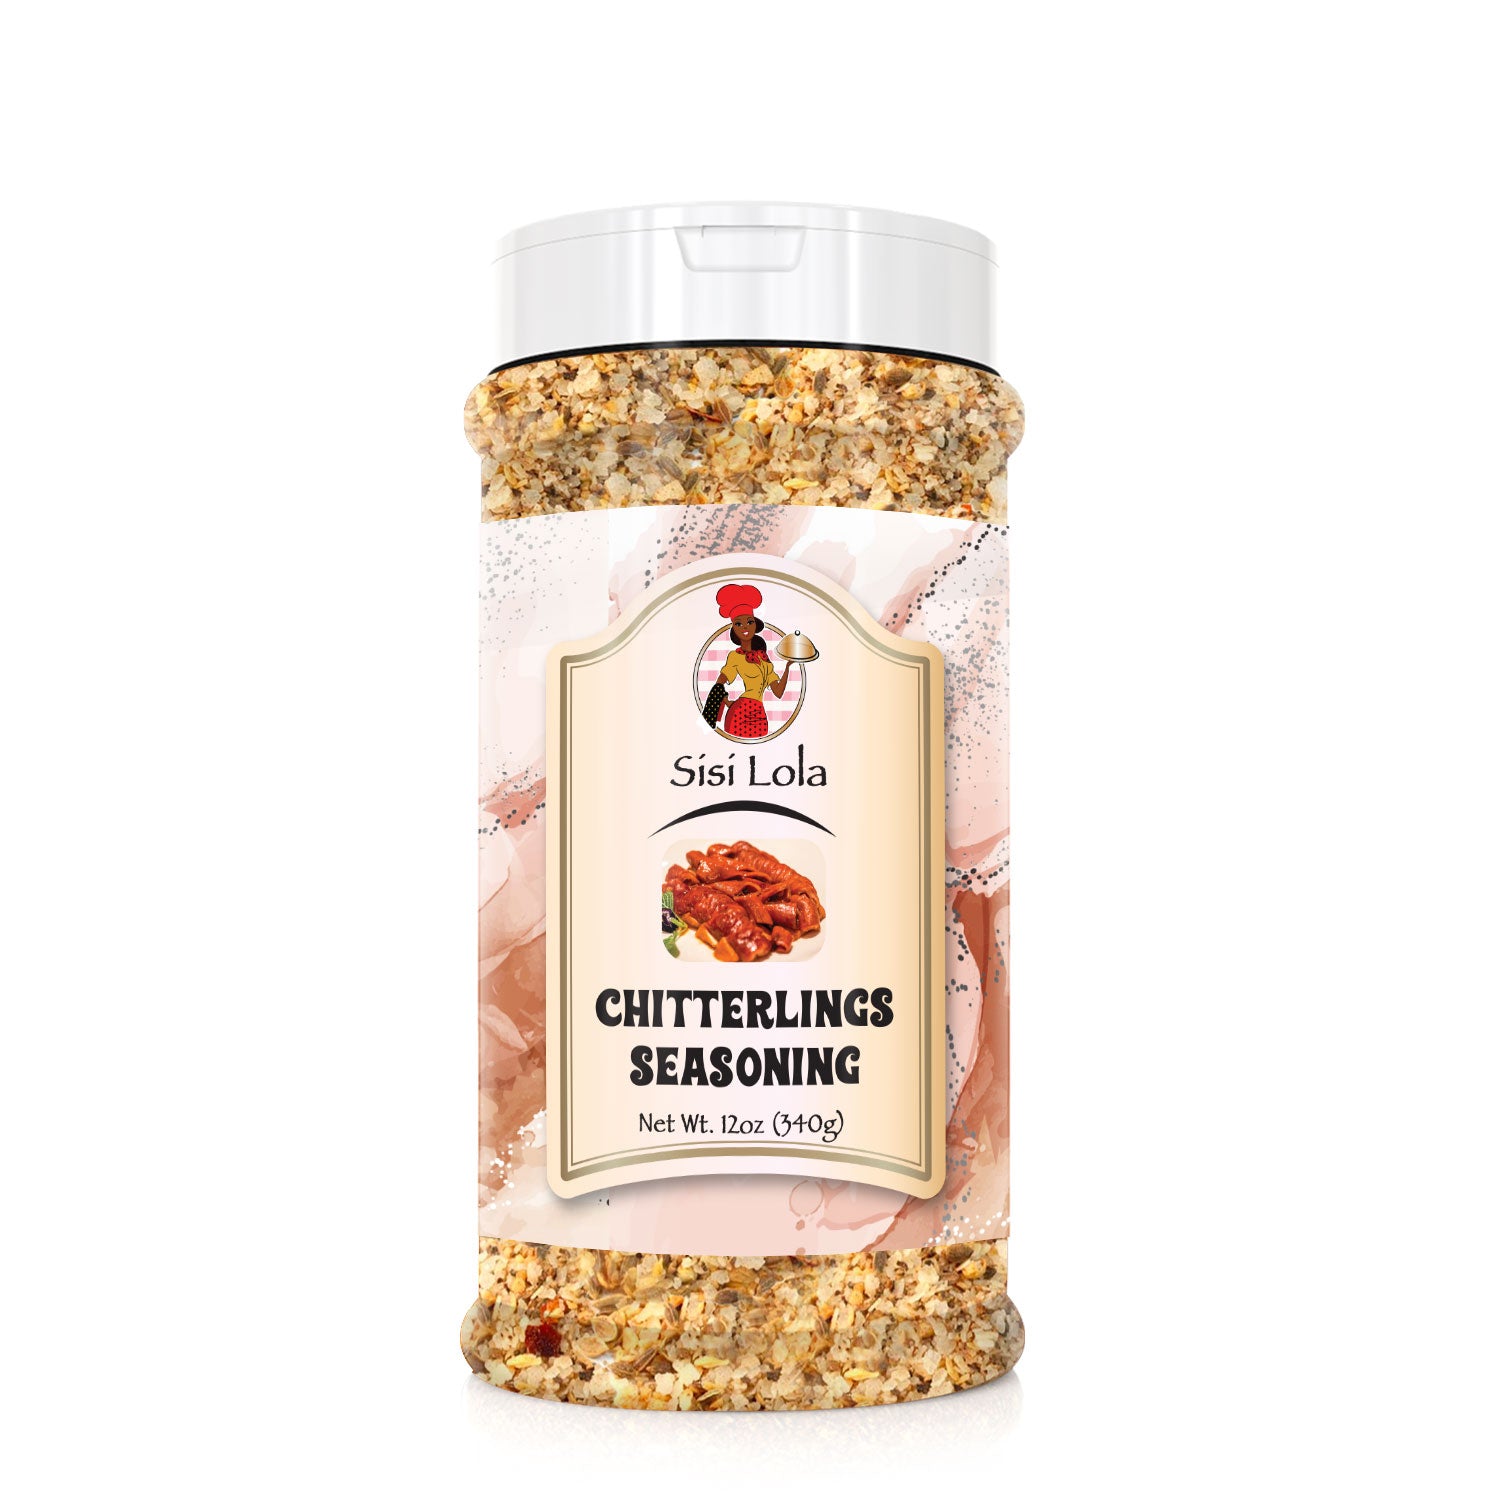  Chittlering Seasoning for Creole spices, Chitlins - 2.75 oz by  Spice Supreme (1) : Poultry Seasonings : Grocery & Gourmet Food